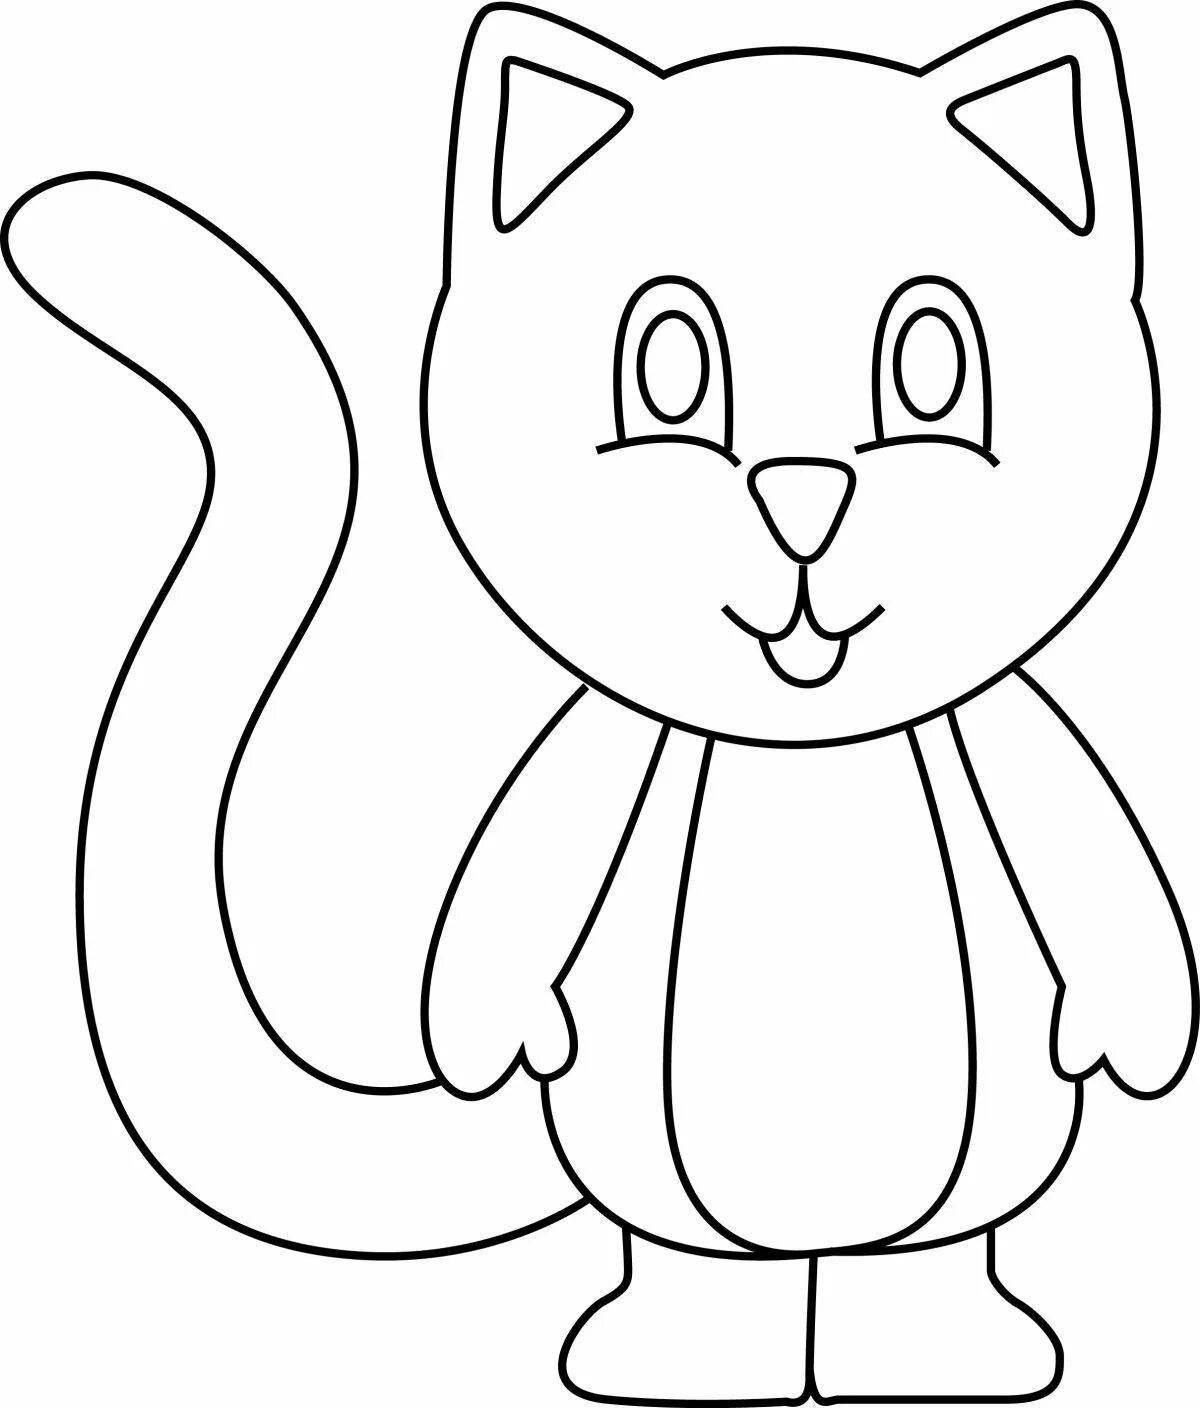 Playful cat coloring simple